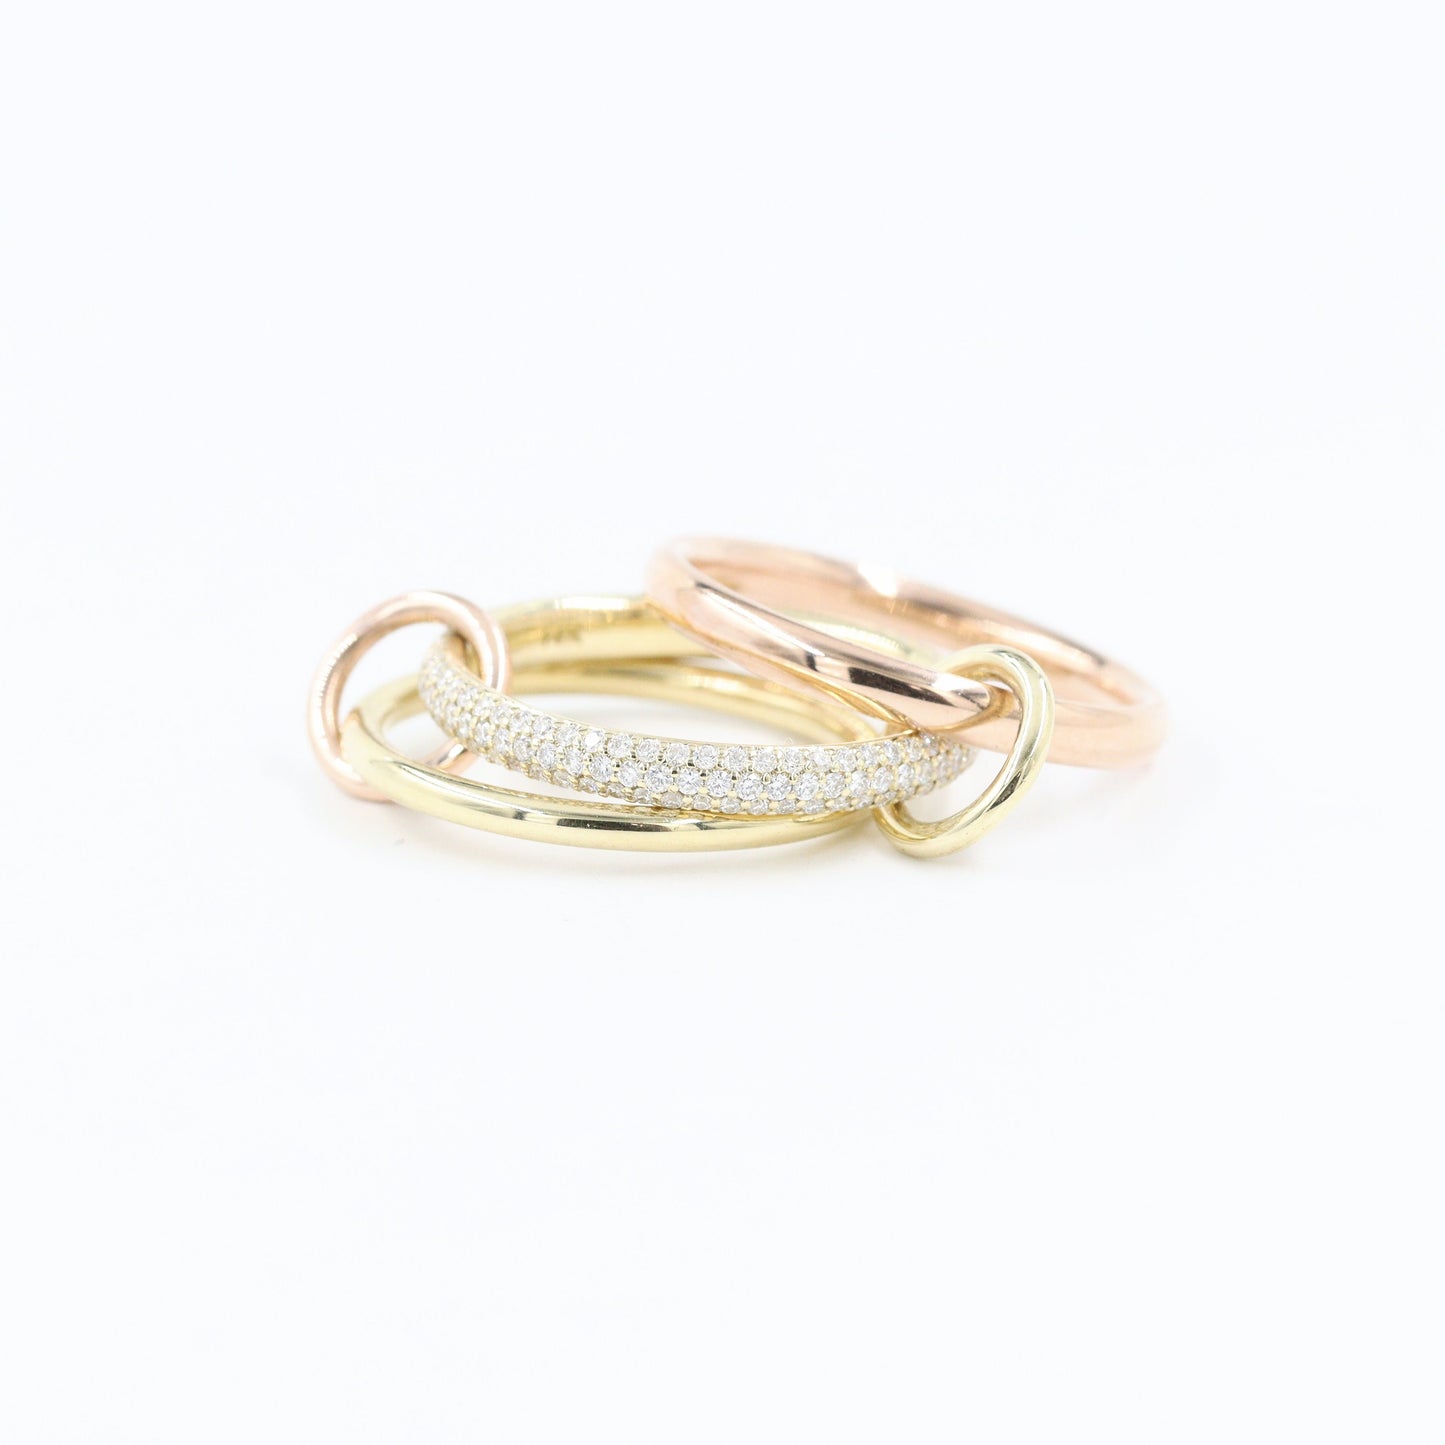 Stacking Rings with Connectors/Yellow Rose White gold 3 Bands with 2 connectors/2.6 mm Width Diamond Rings/Sean's Bundle of 3 Rings